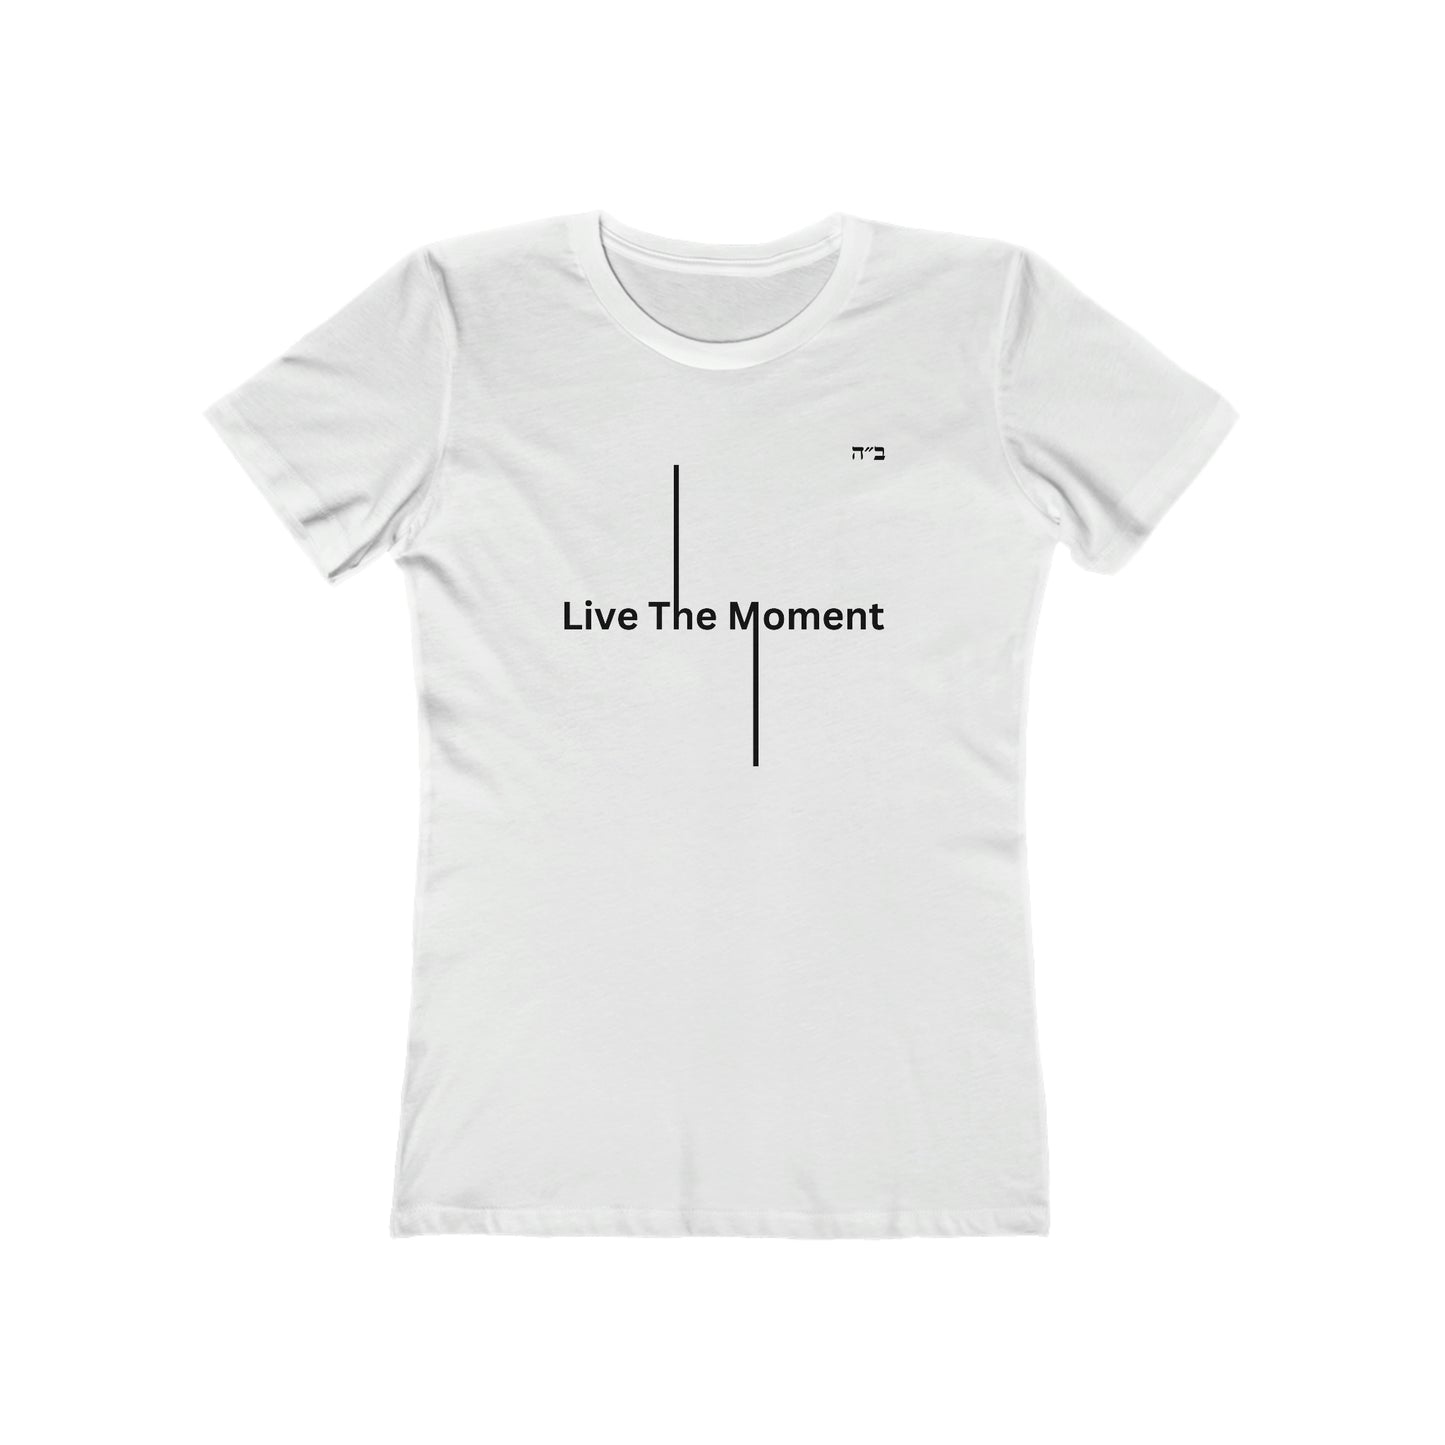 B"H Live The Moment Women's Tee